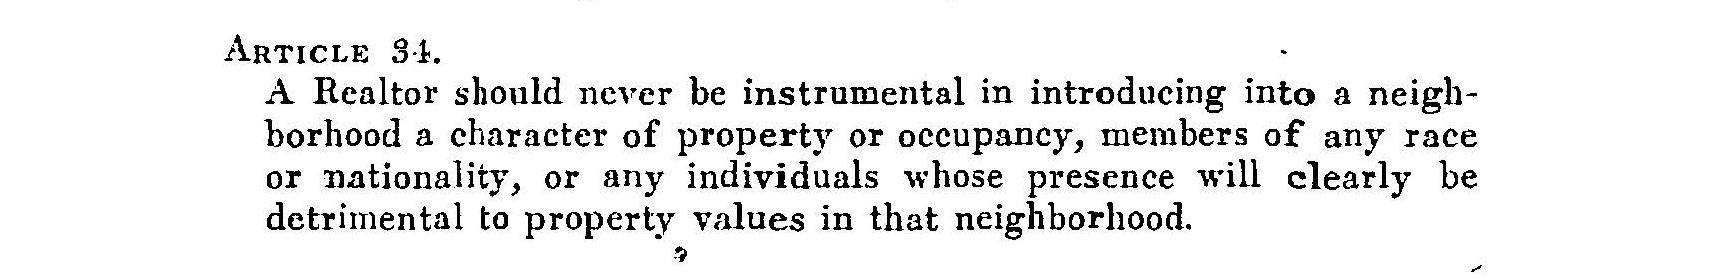 An excerpt from the Realtor Code of Ethics adopted by the National Association of Real Estate Boards in 1924 and revised in 1928. The article was amended in 1950 to read “A Realtor should never be instrumental in introducing into a neighborhood a character of property or use which will clearly be detrimental to property values in that neighborhood,” but its meaning remained clear, and discriminatory practices continued for years following the change